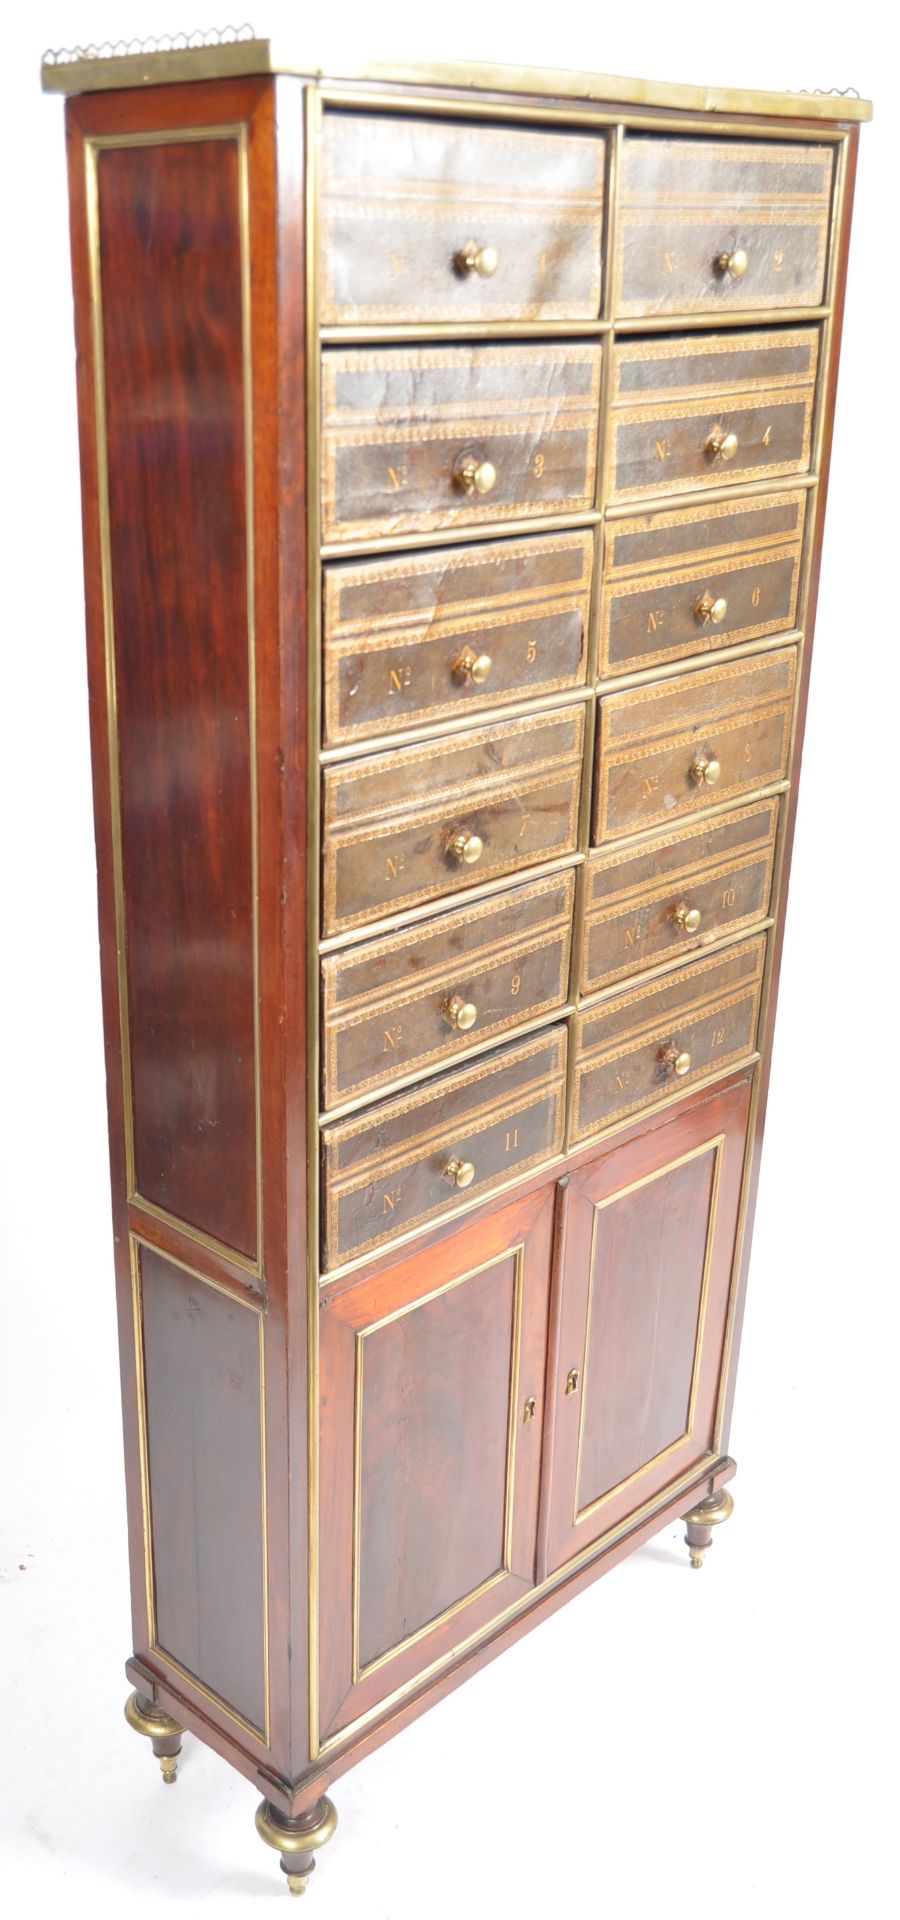 EARLY 20TH CENTURY FRENCH BARRISTERS LEATHER CABINET - Image 3 of 7